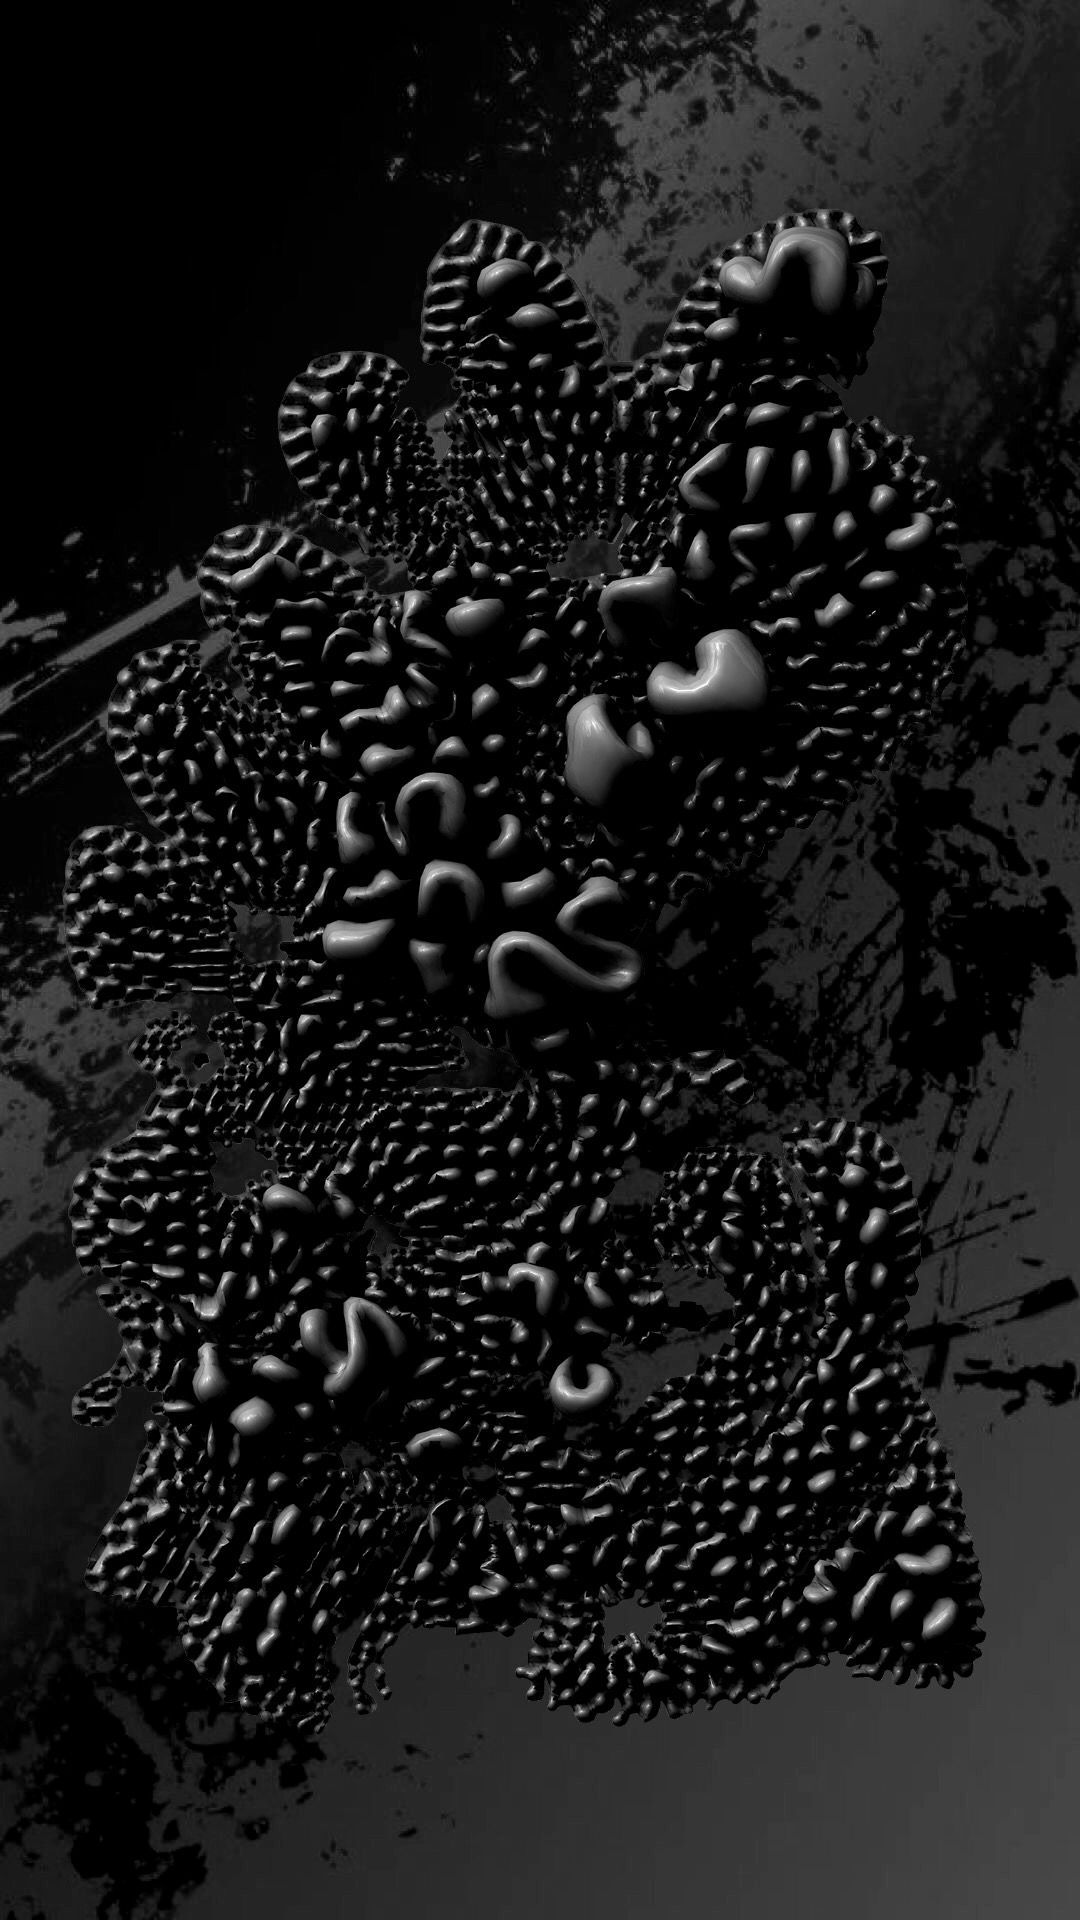 IPhone Wallpaper. Black, Water, Monochrome Photography, Black And White, Still Life Photography, Monochrome